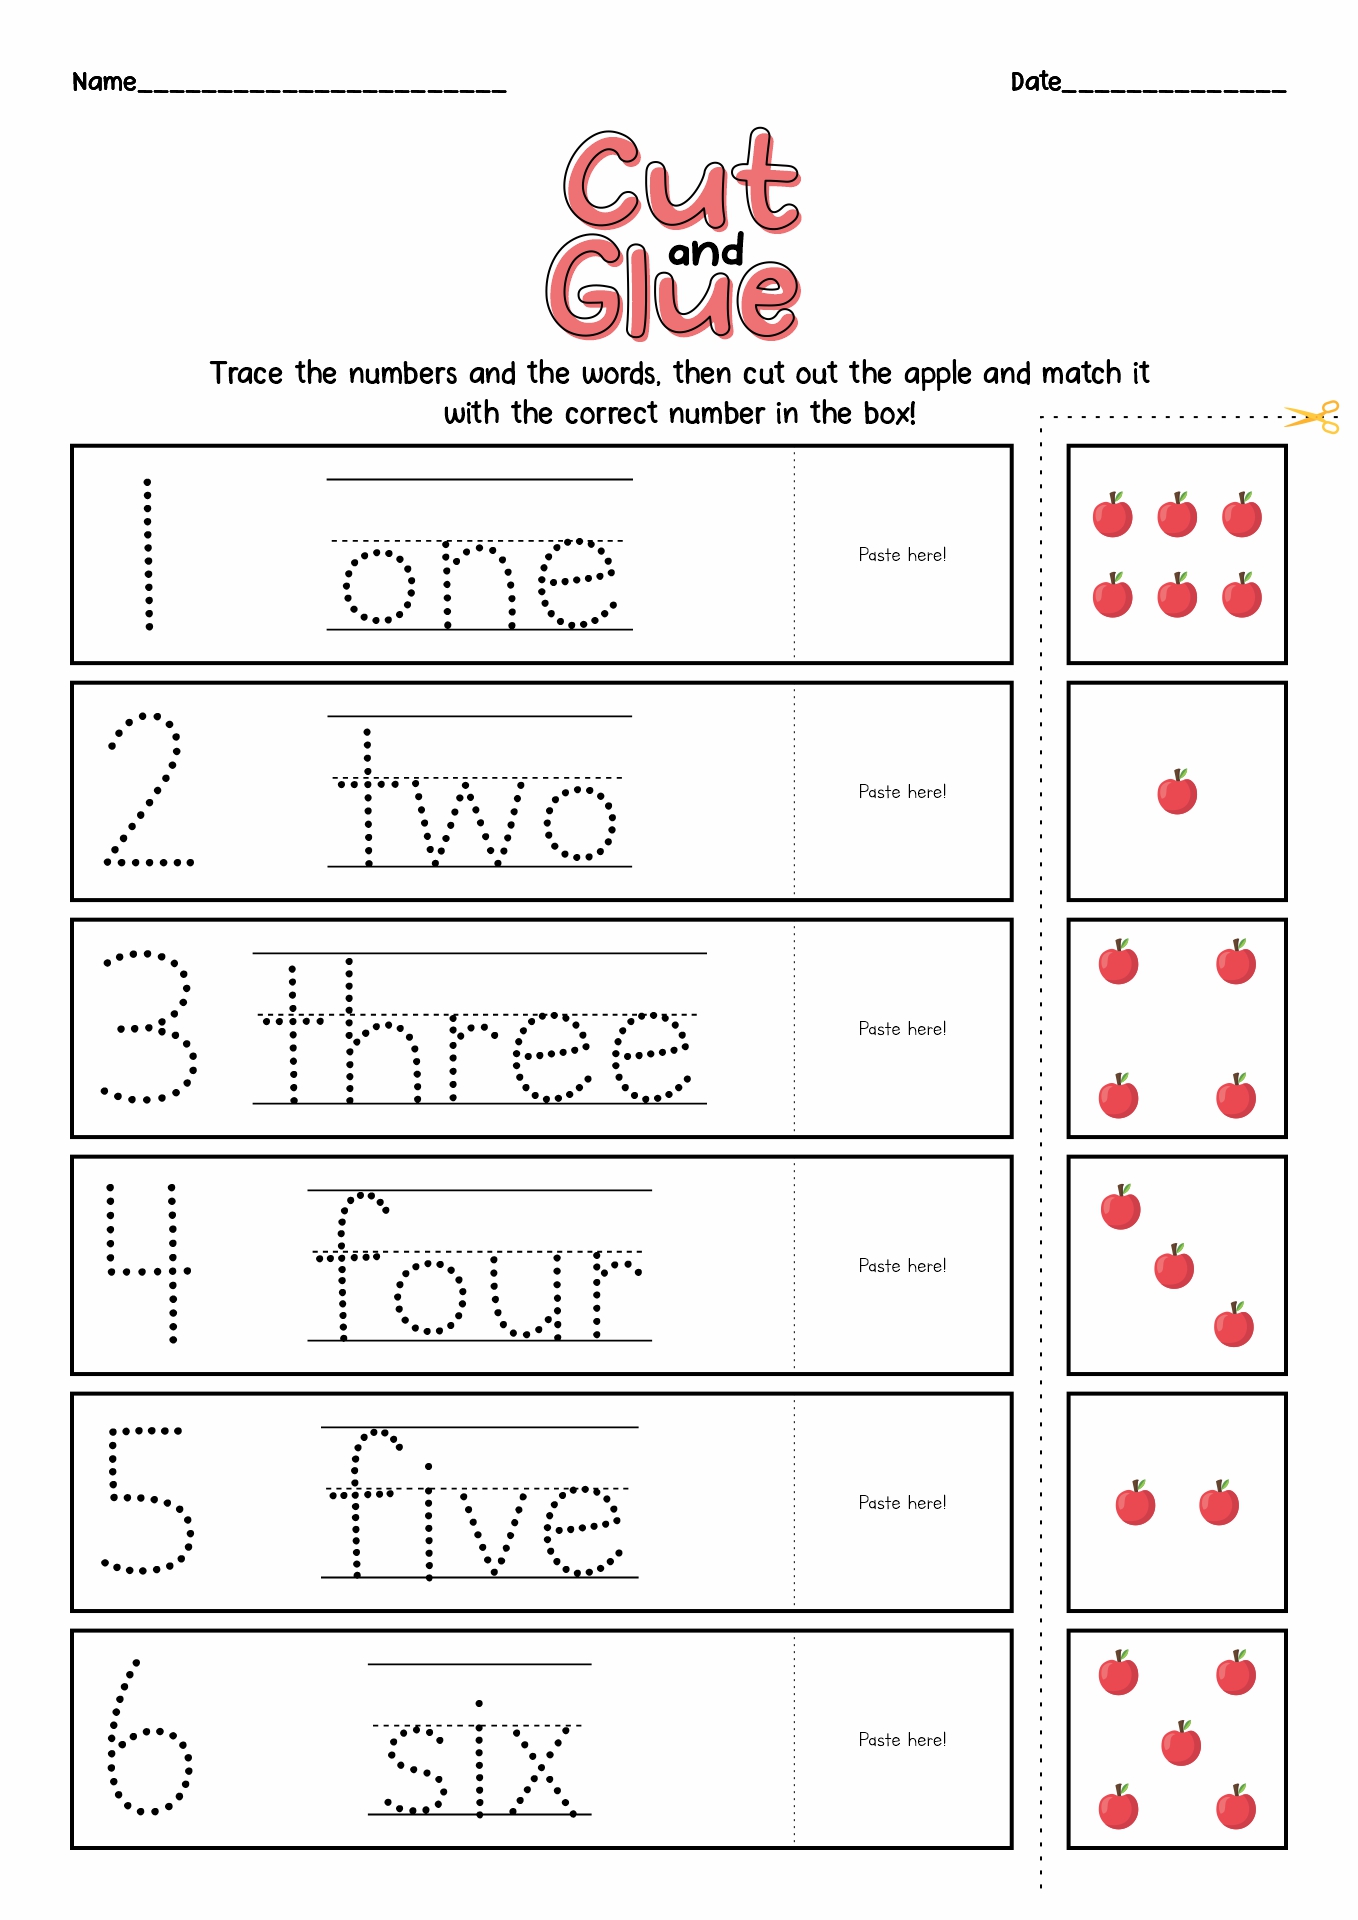 14 Best Images of Number Cut Out Worksheet - Free Preschool Cut and